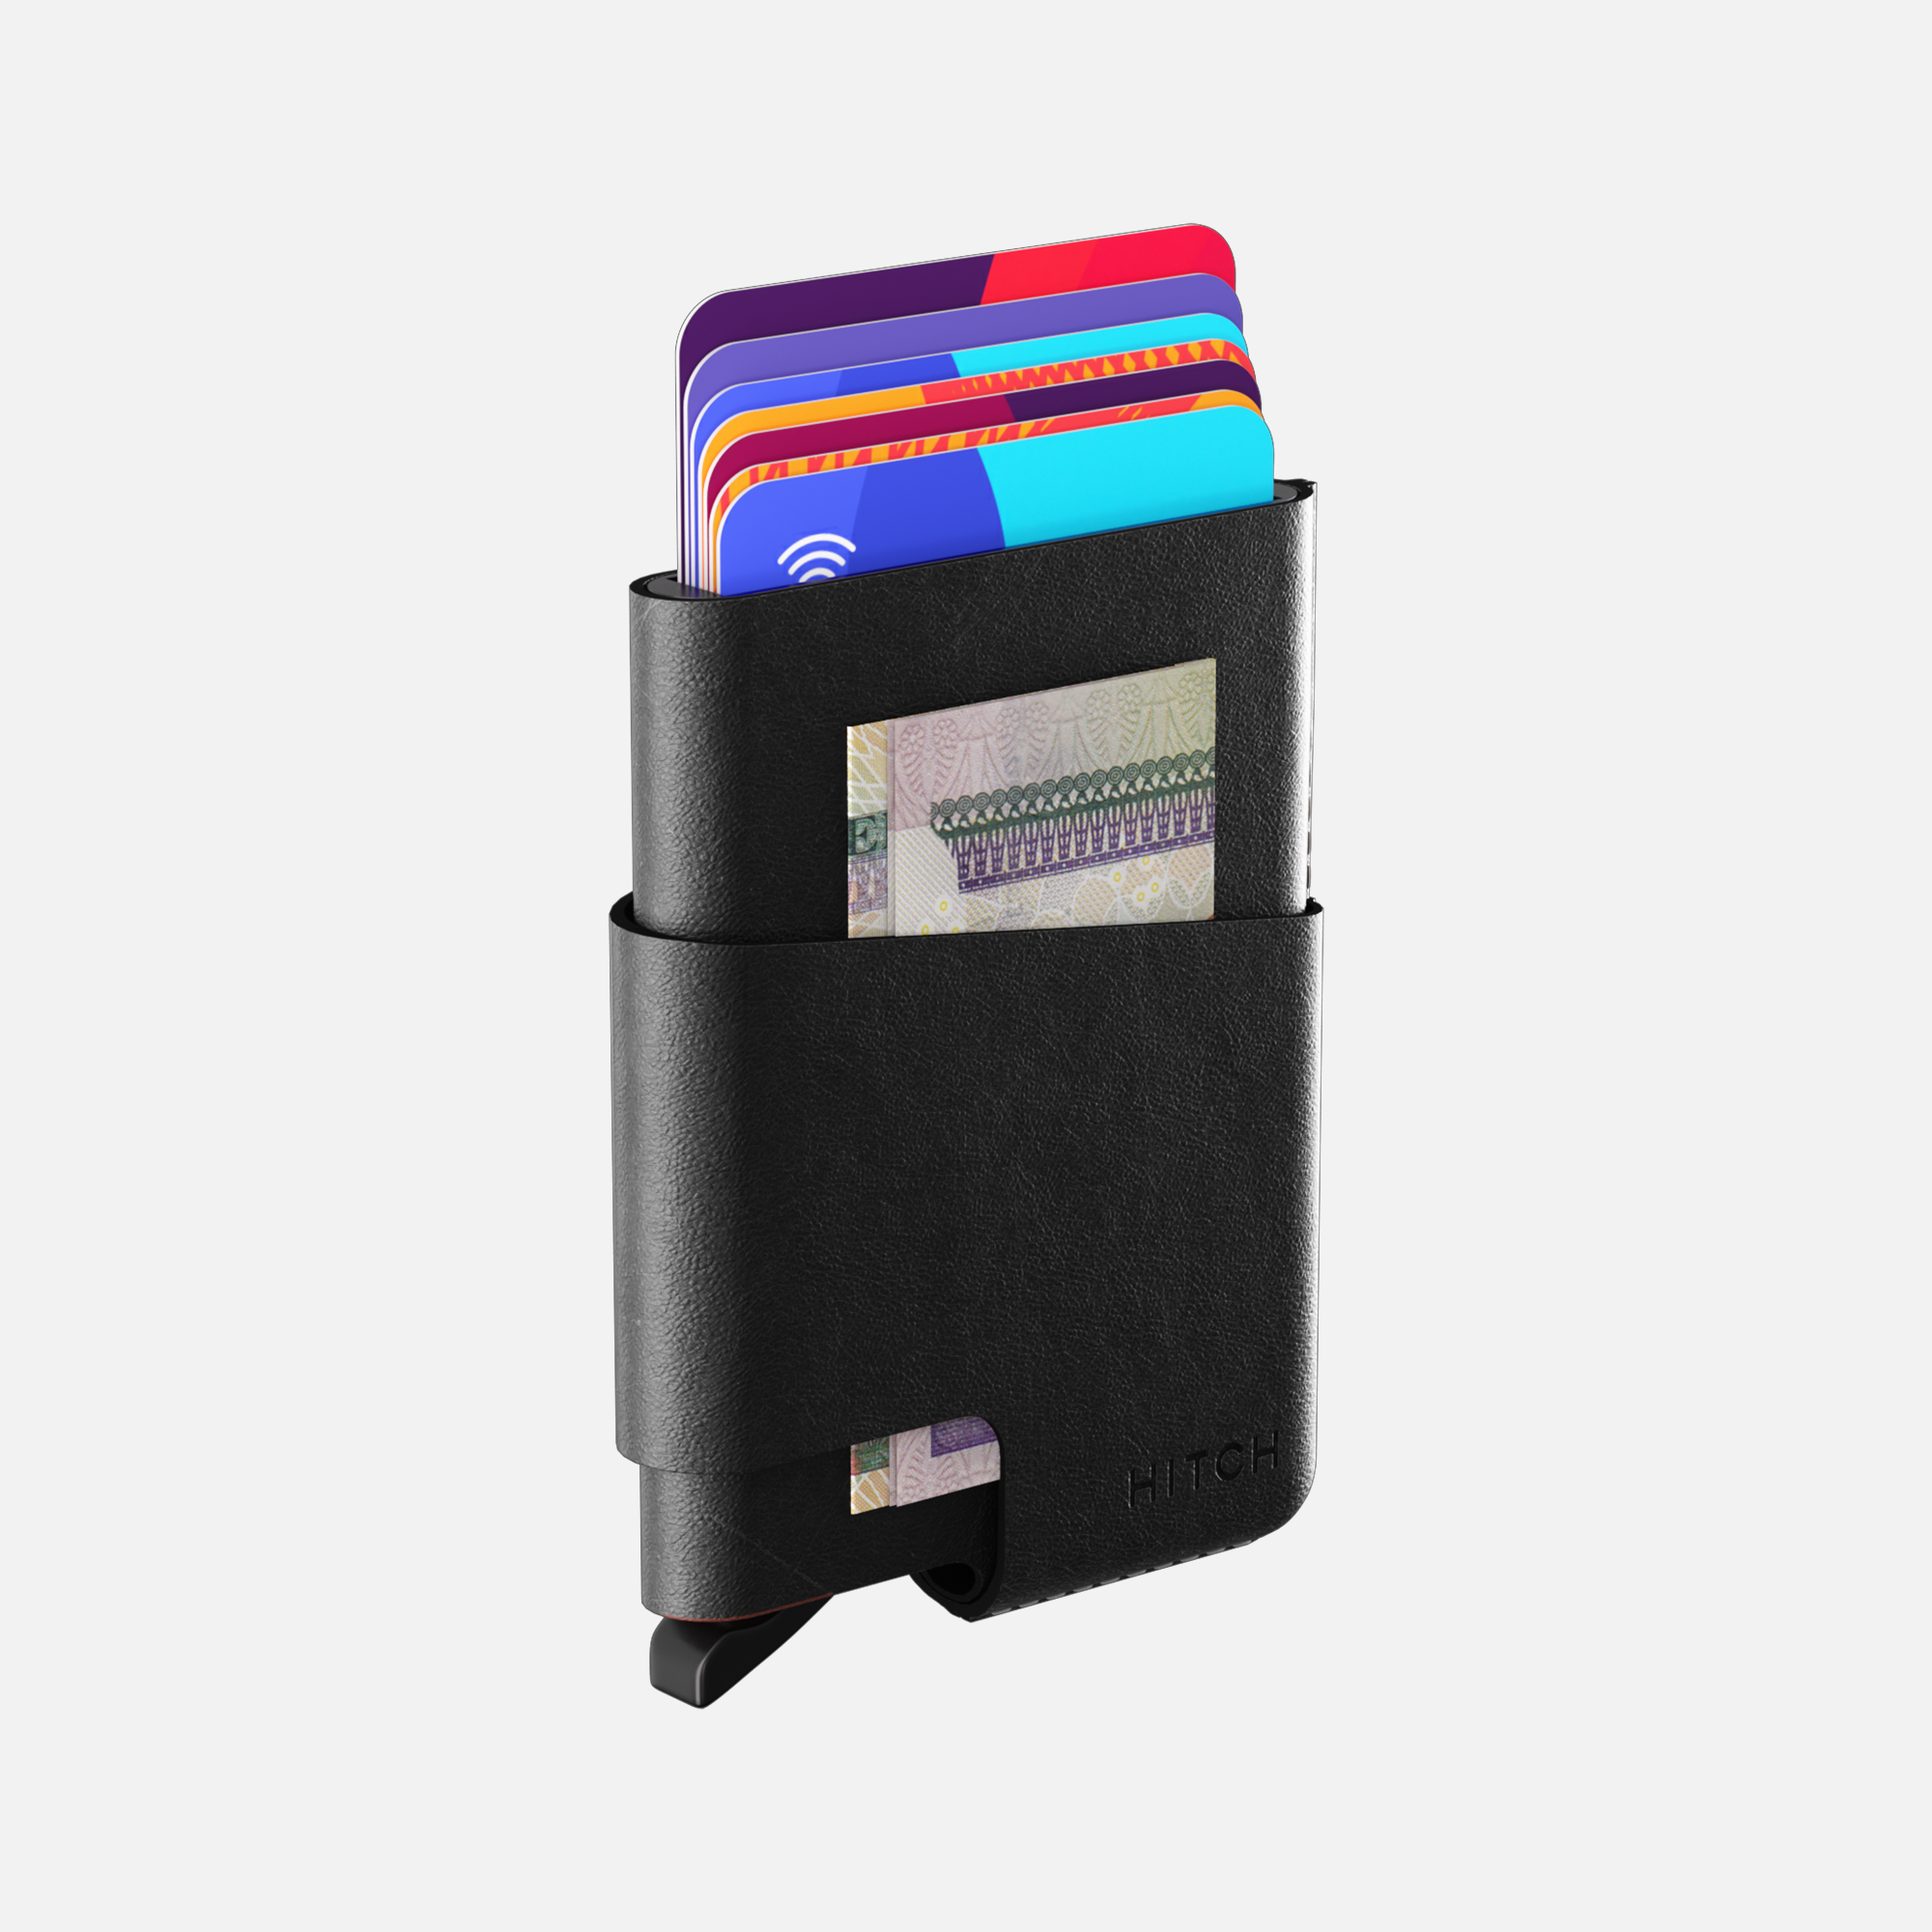 Minimalist wallet with colorful credit cards and money clip.